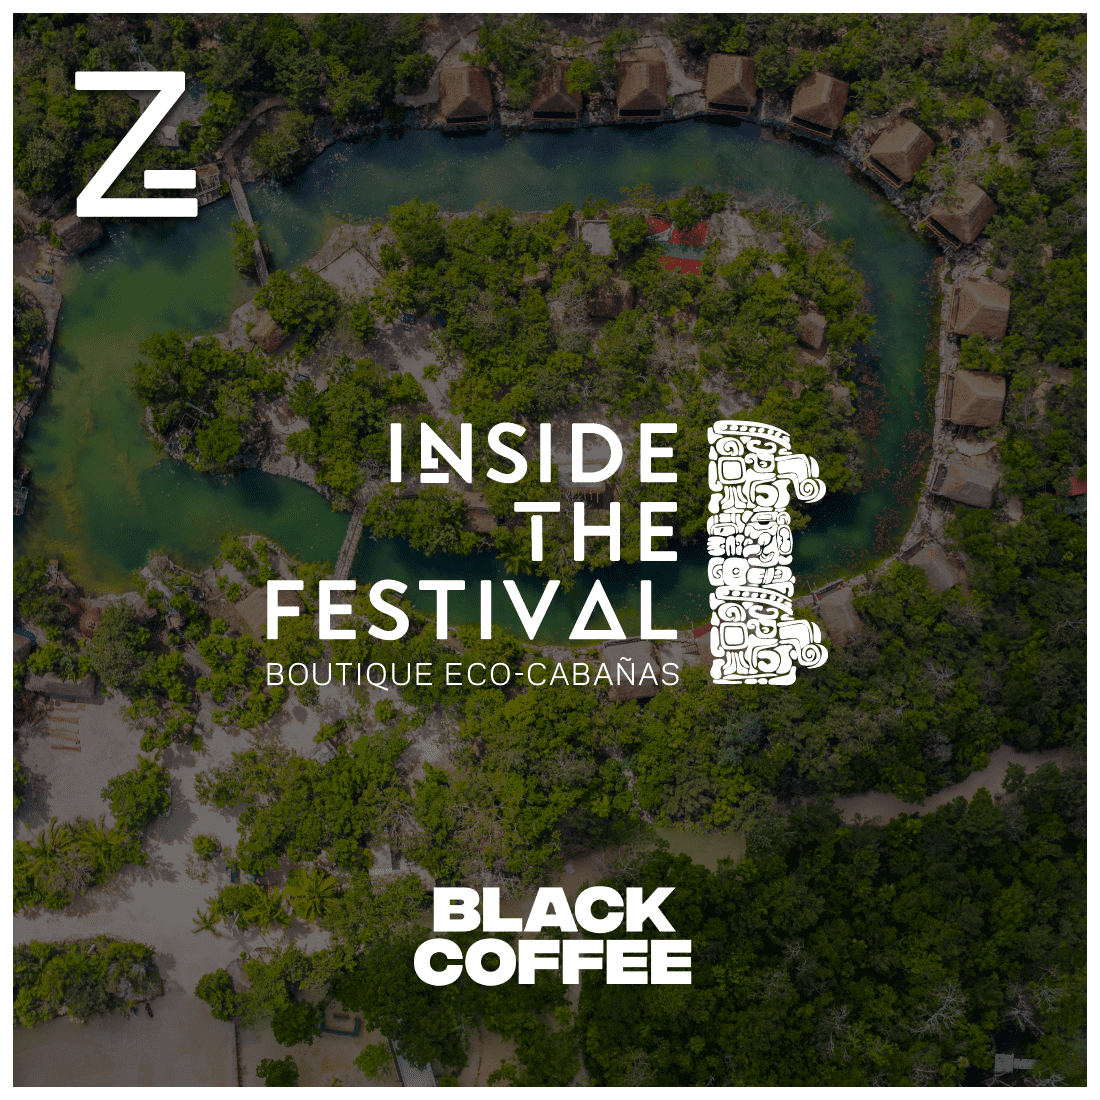 INSIDE THE FESTIVAL: 2 nights at Cabin + Backstage Tickets - BLACK COFFEE